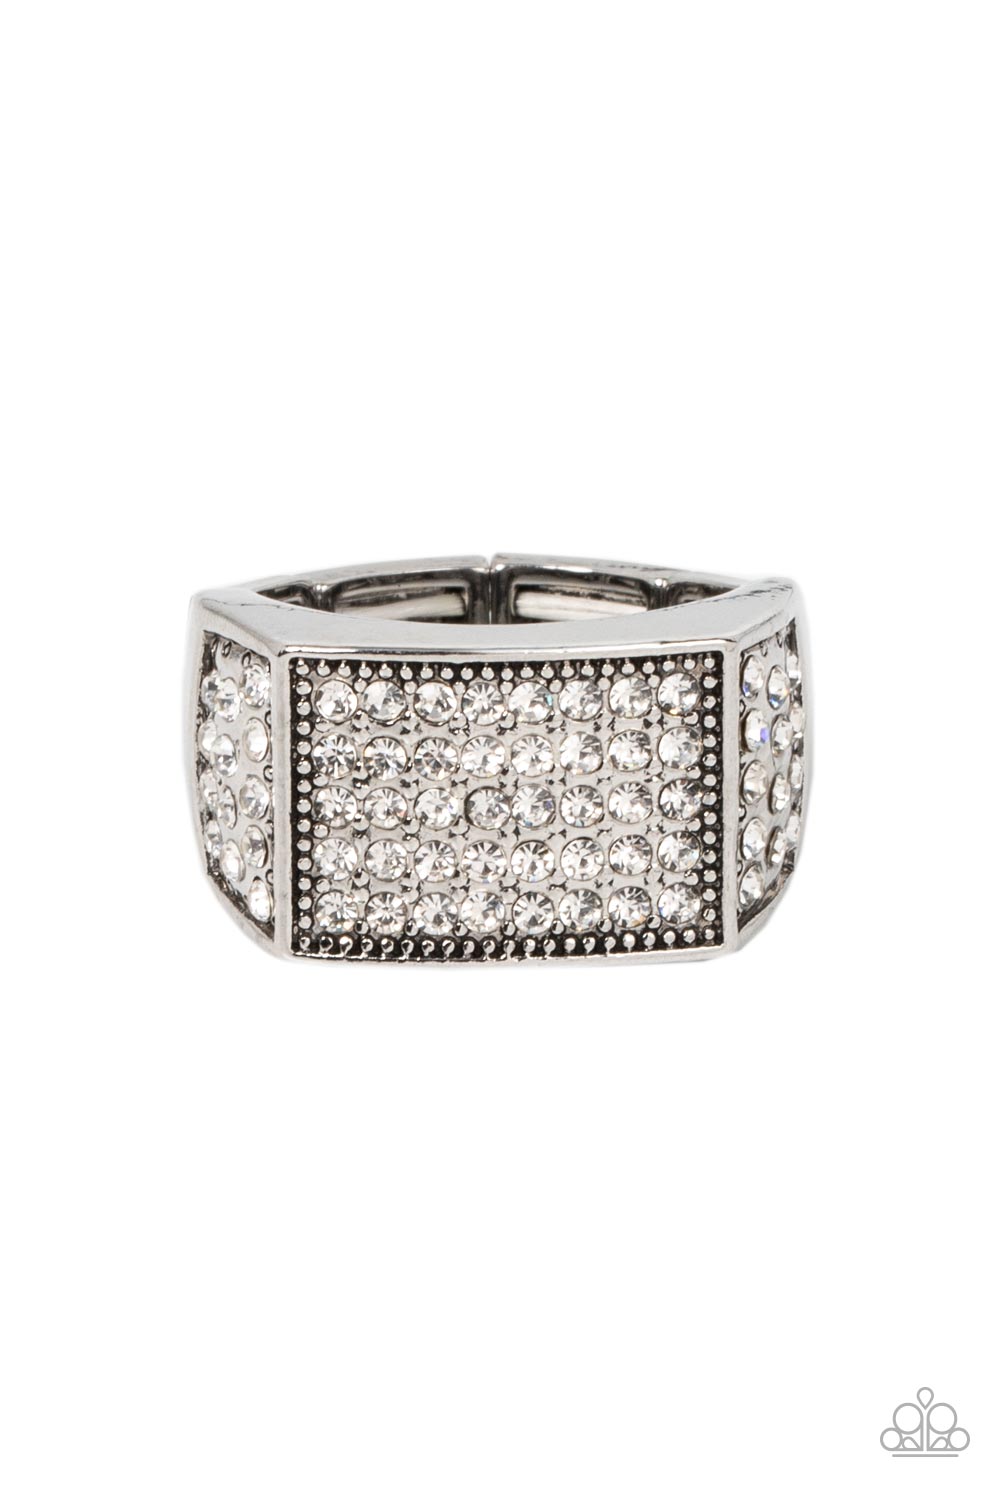 Metro Merger White Ring - Paparazzi Accessories  The front of a rectangular silver frame is encrusted in sections of white rhinestones, resulting in a smoldering centerpiece atop the finger. Features a stretchy band for a flexible fit.  Sold as one individual ring.